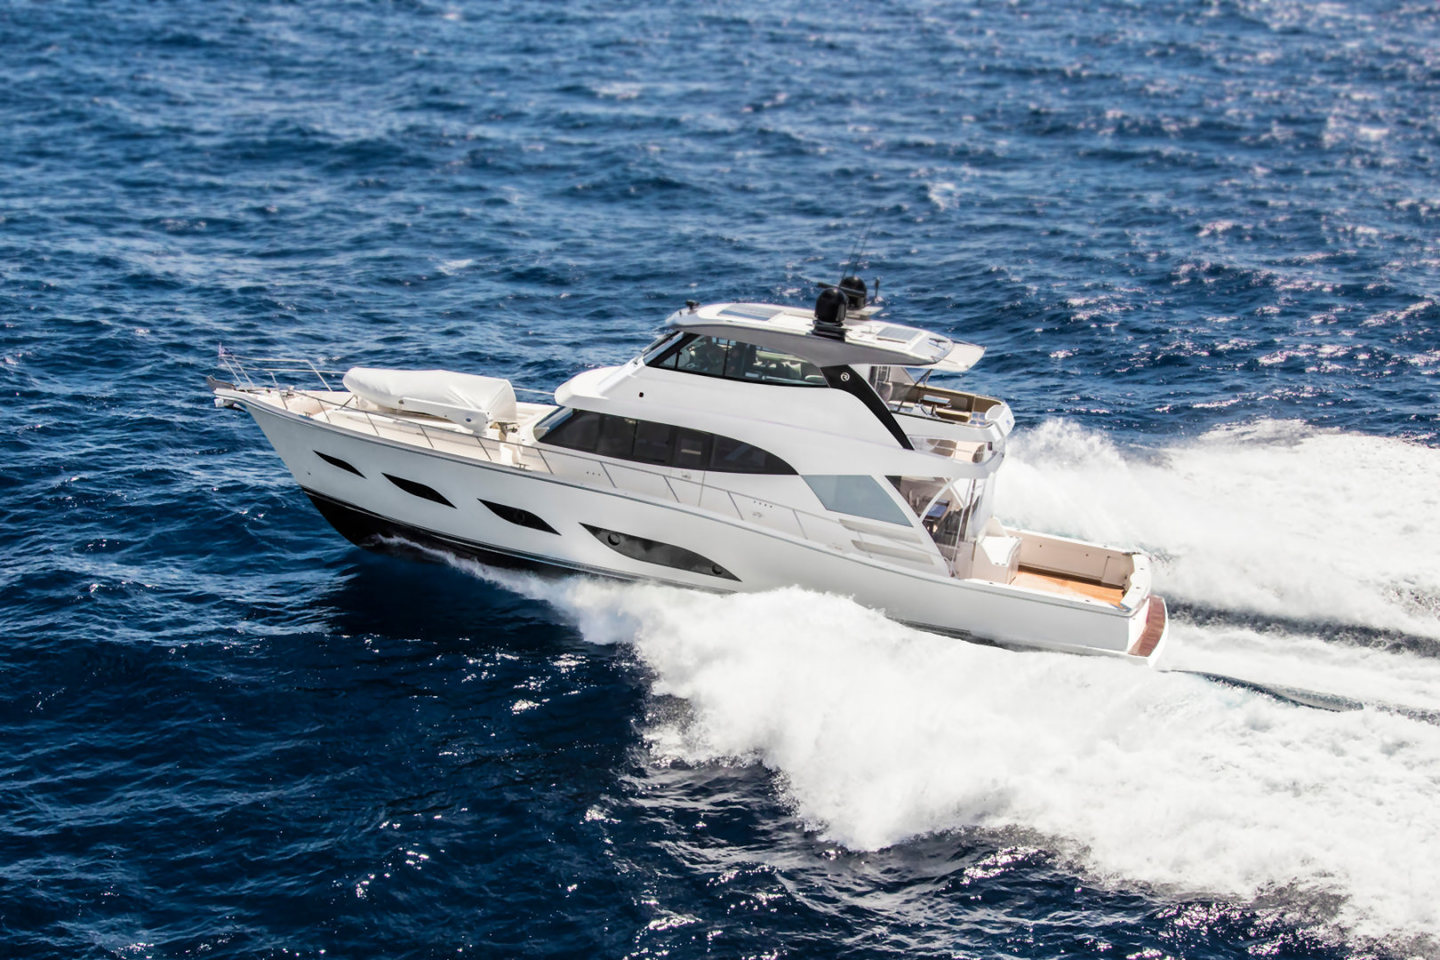 360 VR Virtual Tours of the Riviera 72 Sports Motor Yacht